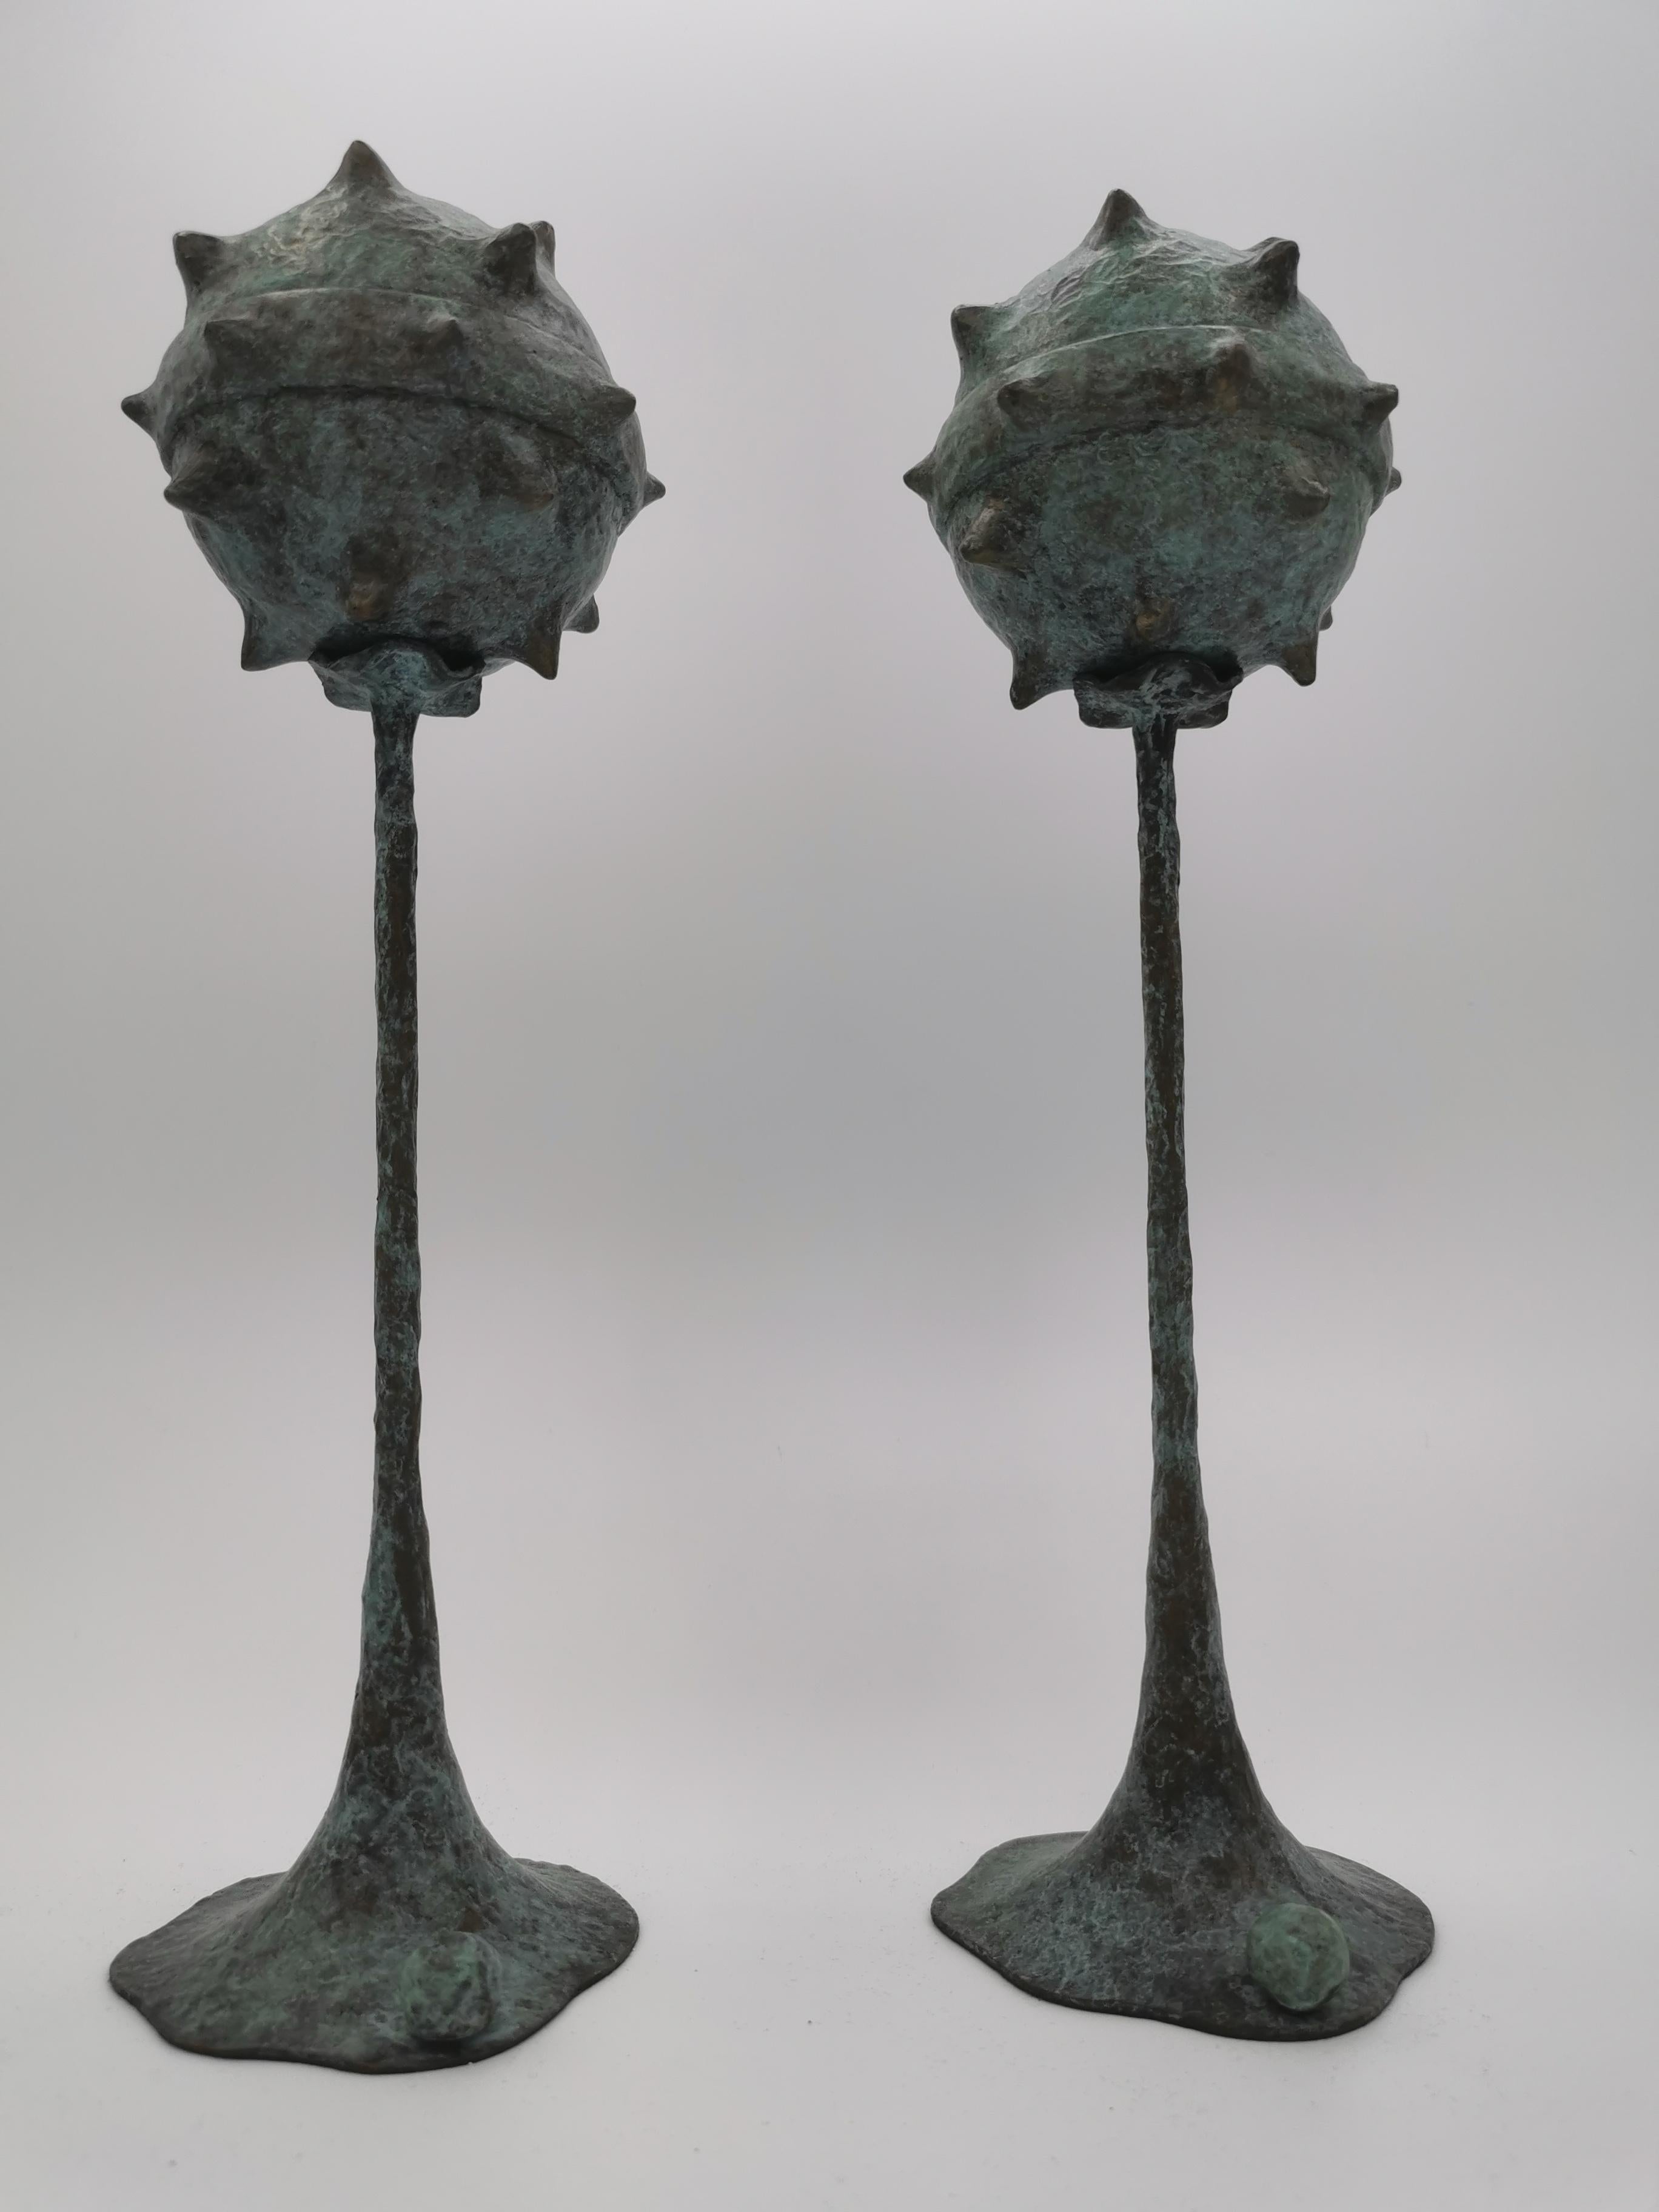 Set of two bronze decorative objects by Emanuele Colombi.
Limited Edition 
Roma Collection 2022 PRIMUS SMALL

Materials: bronze
Finishes: vert de gris patine (Number 1 of 12)

Various finishes and sizes available

Italian design and french